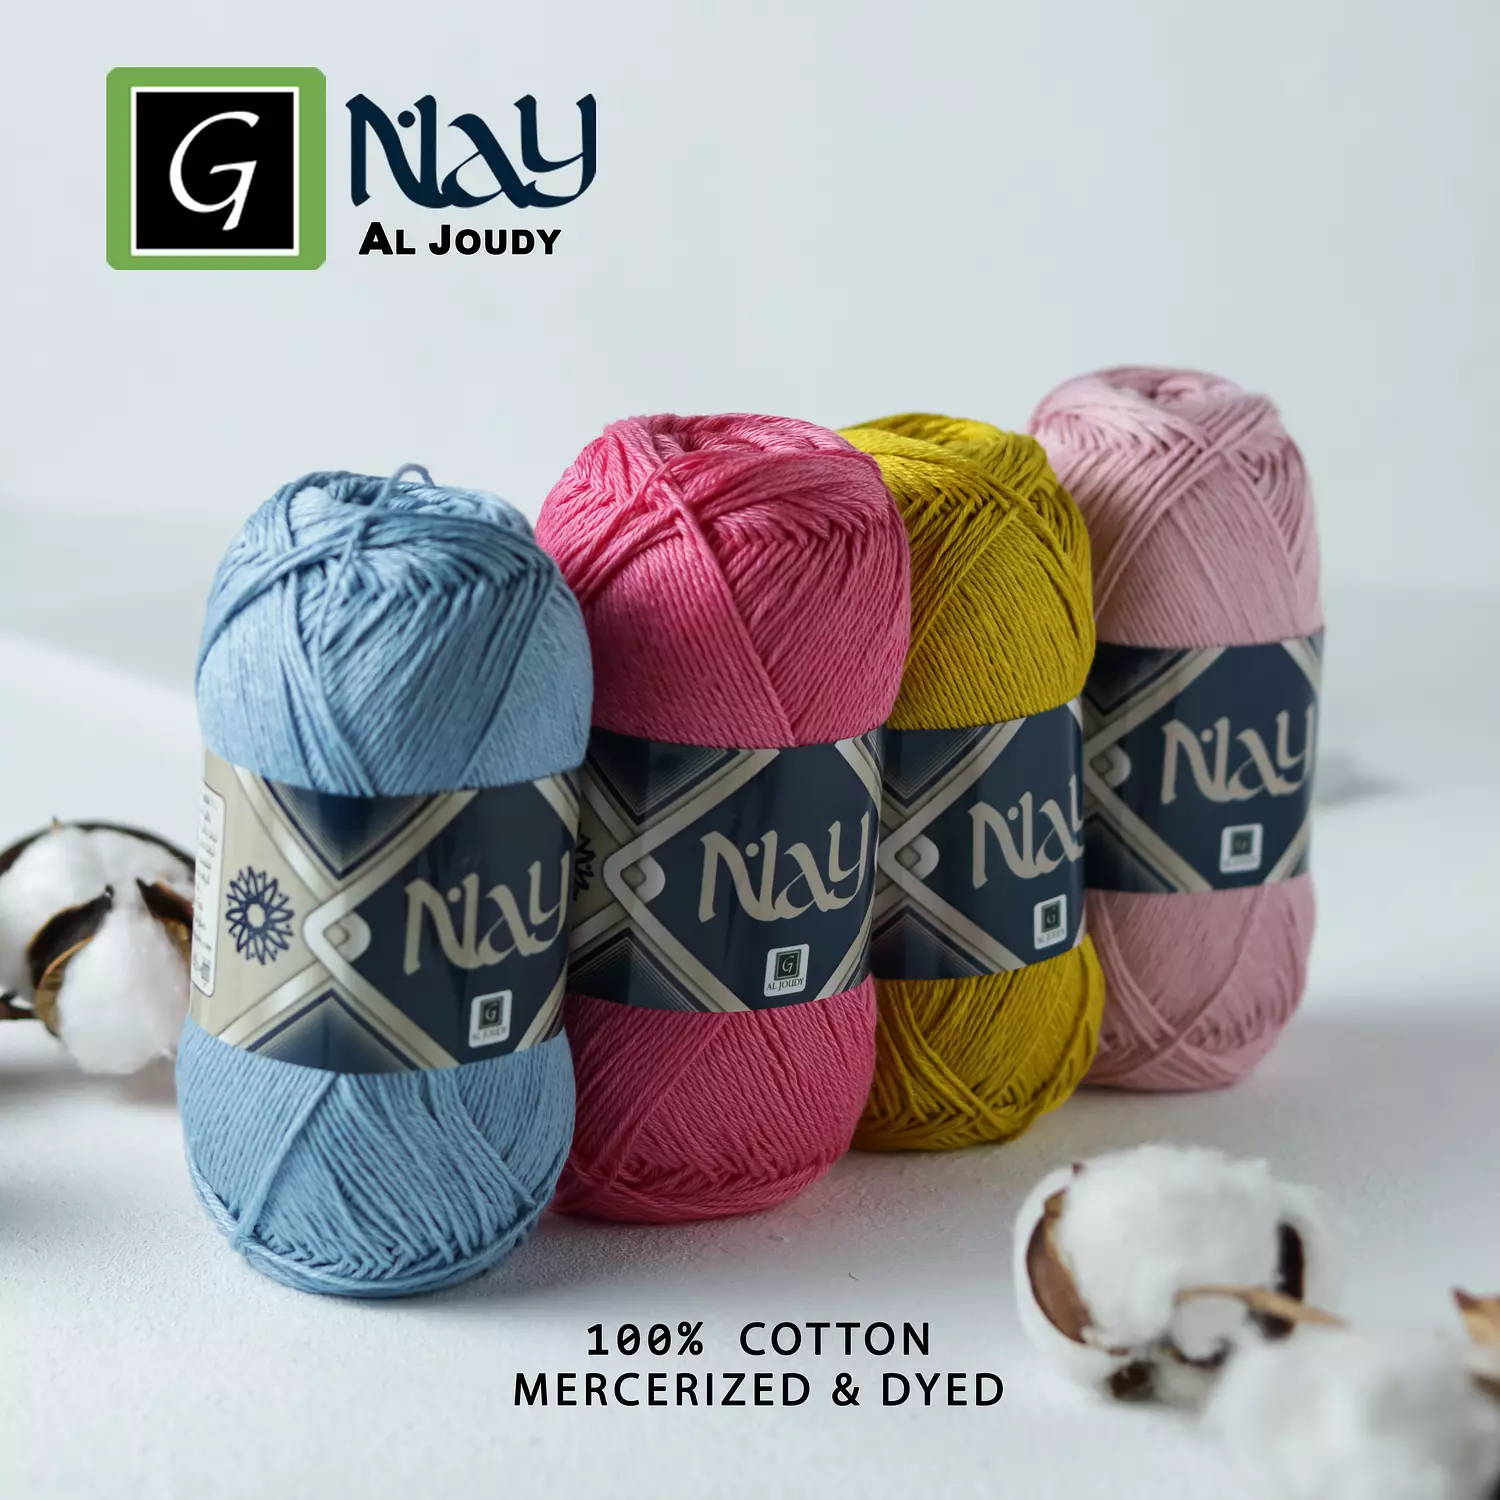 Nay Crochet hover image